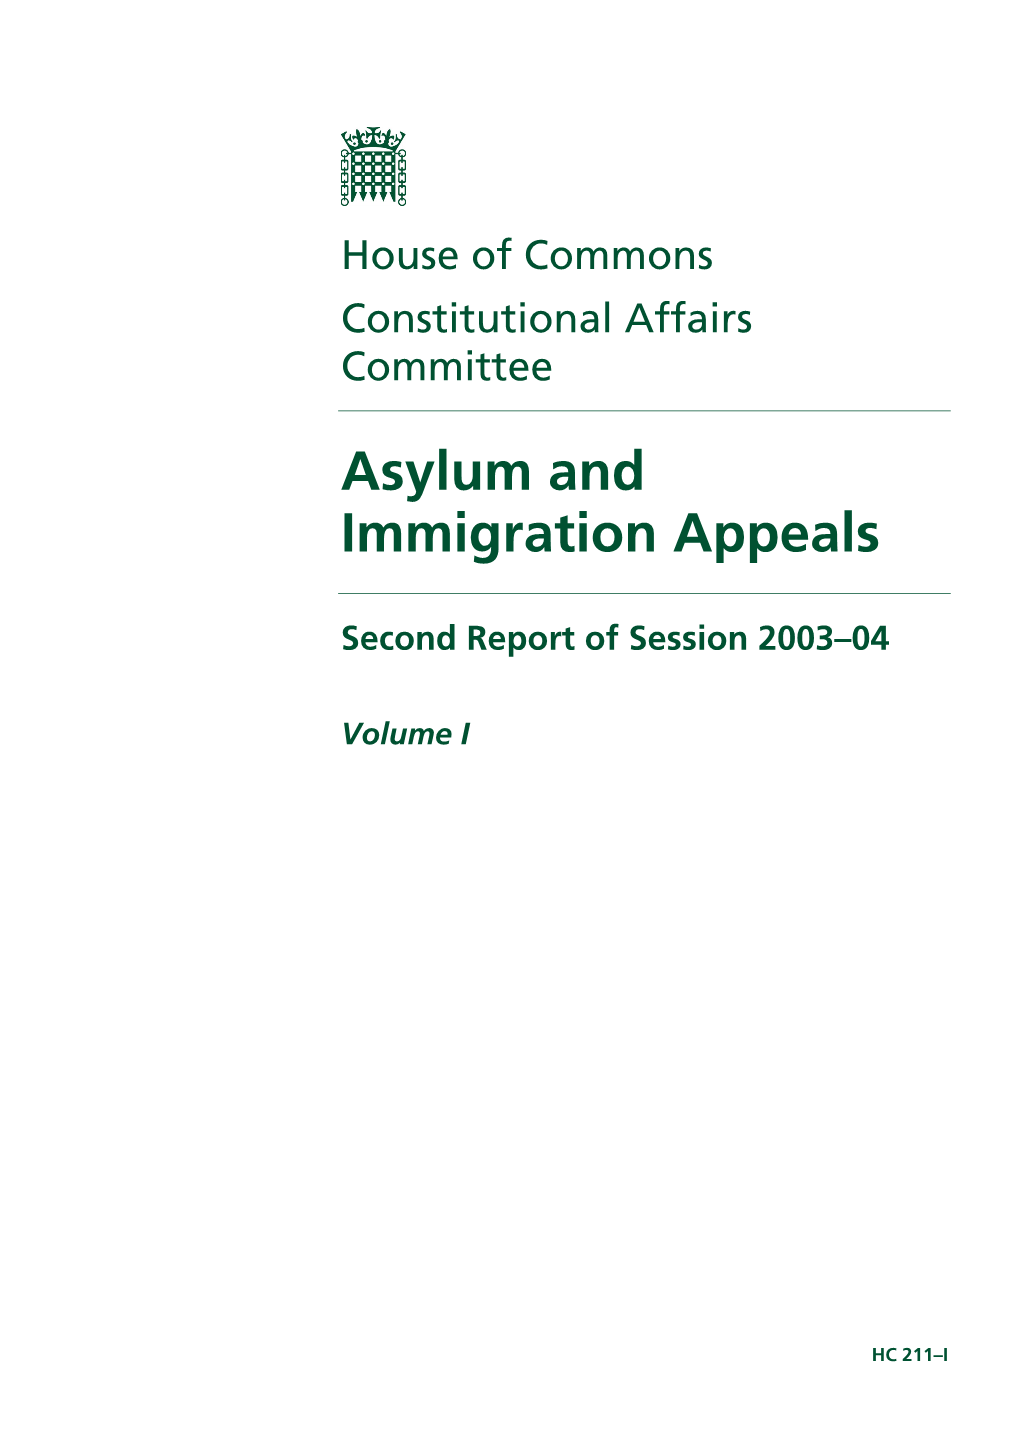 Asylum and Immigration Appeals